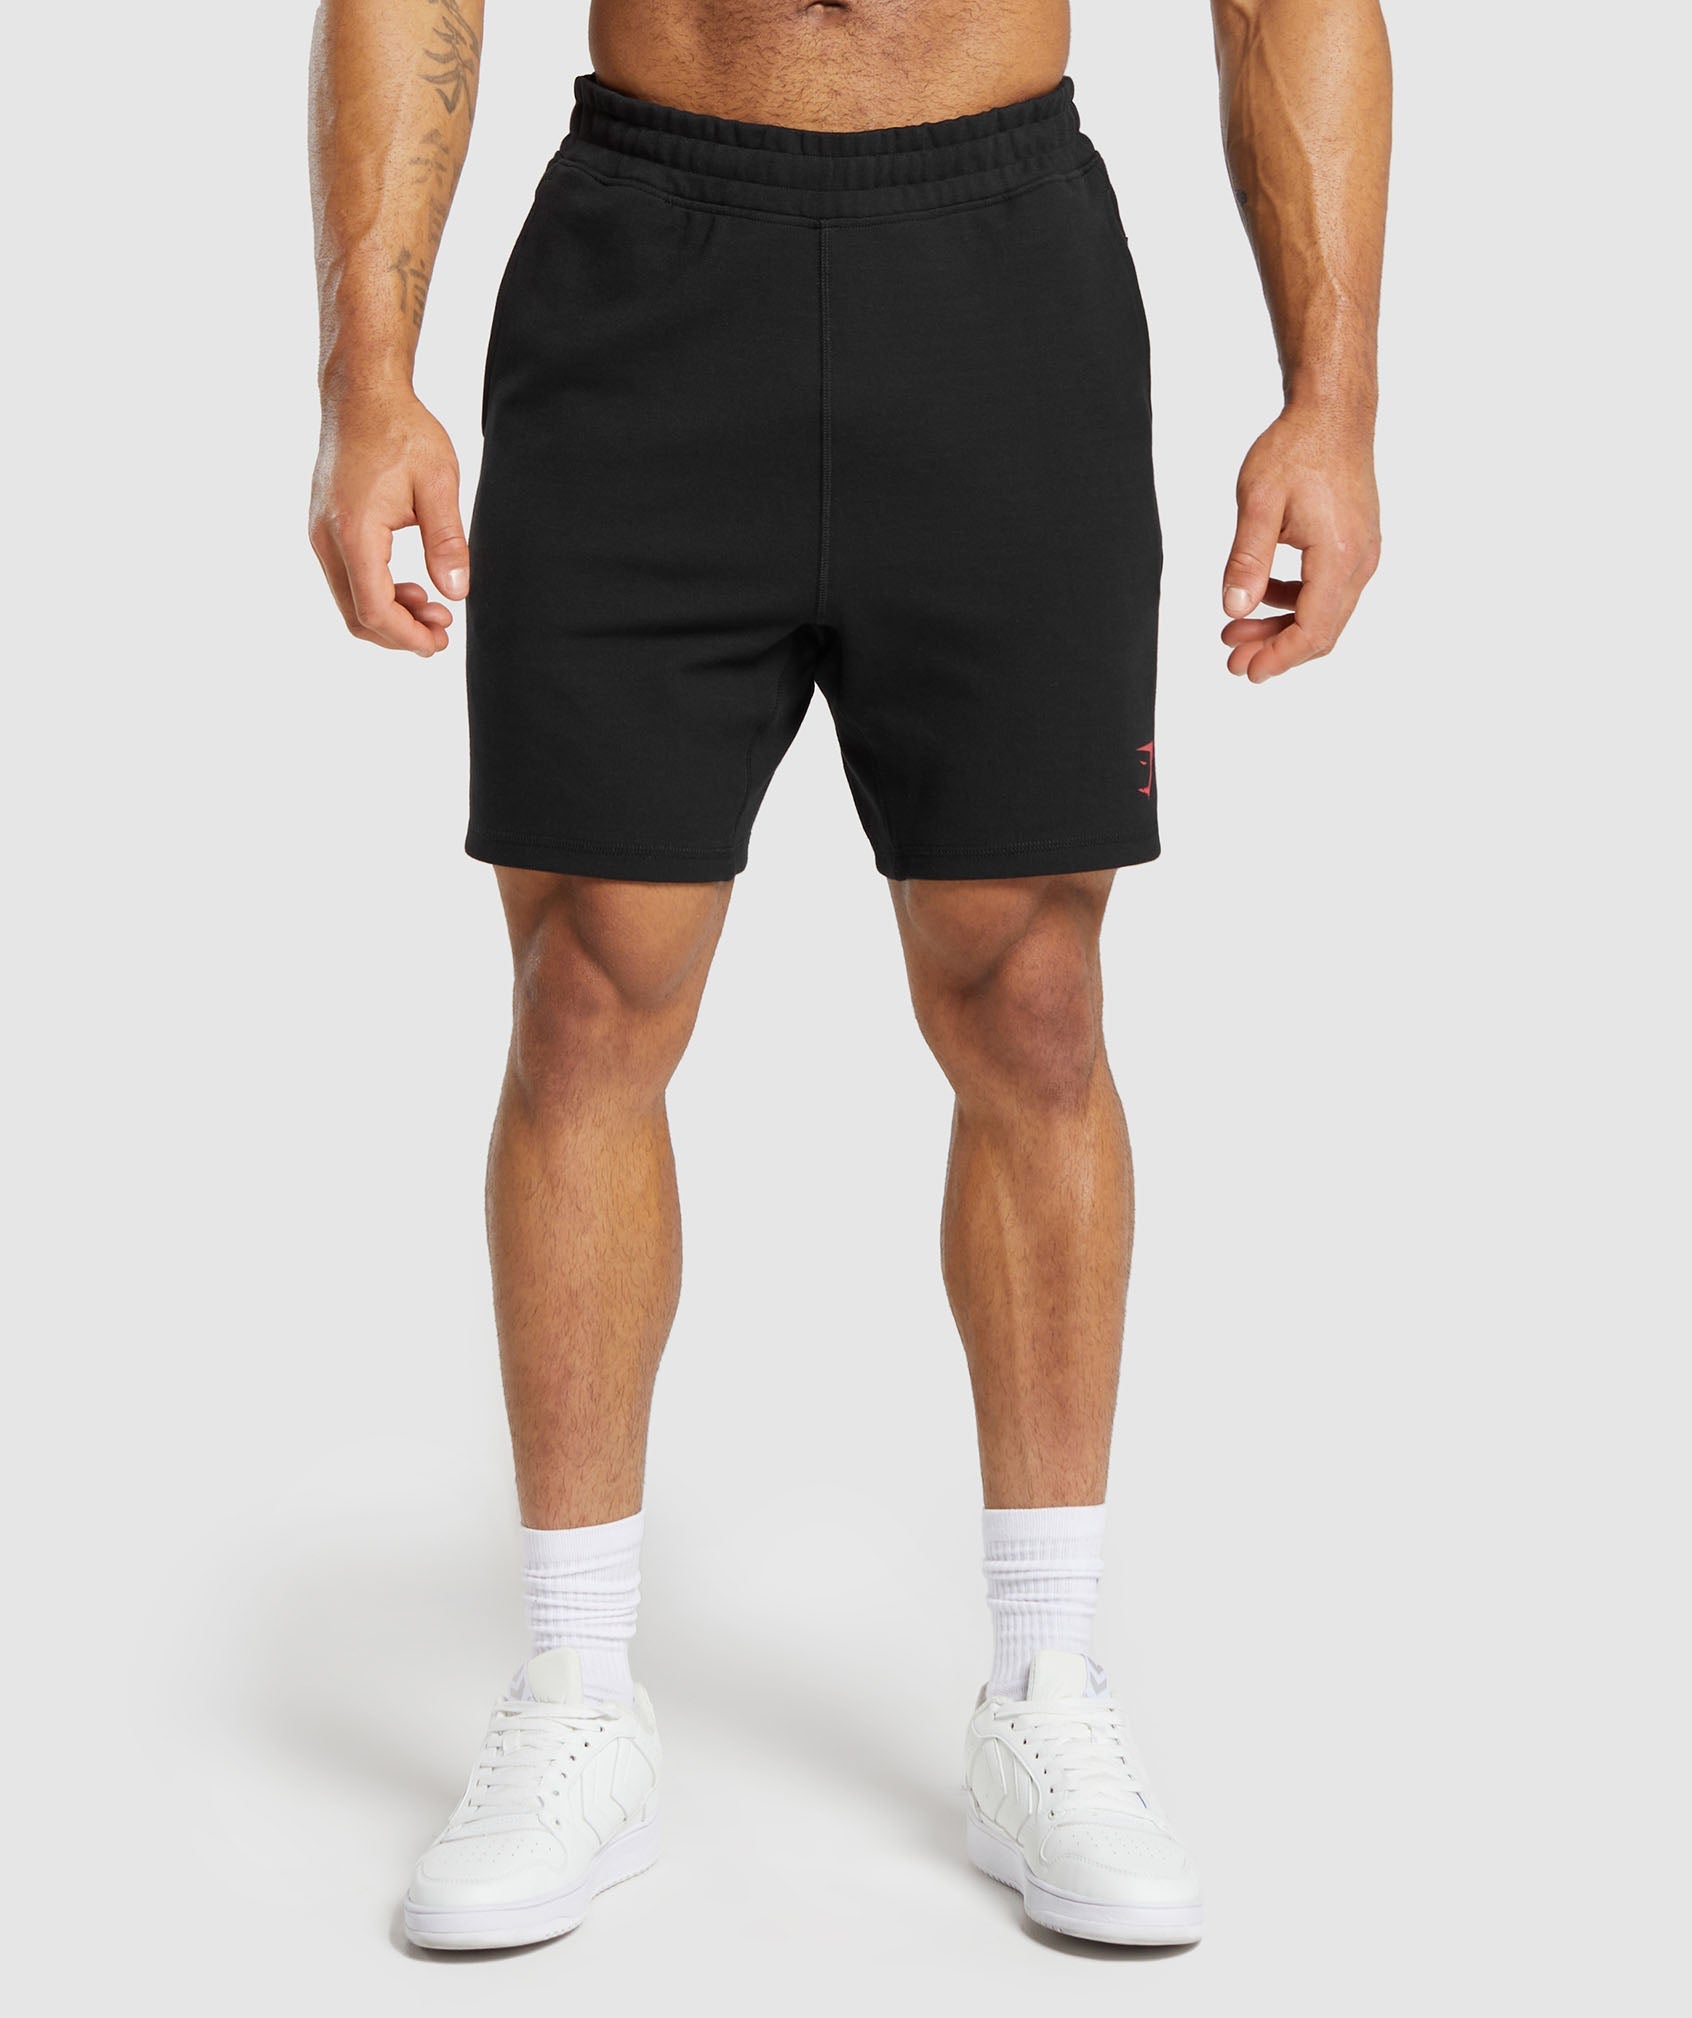 Impact Shorts in Black/Vivid Red - view 2